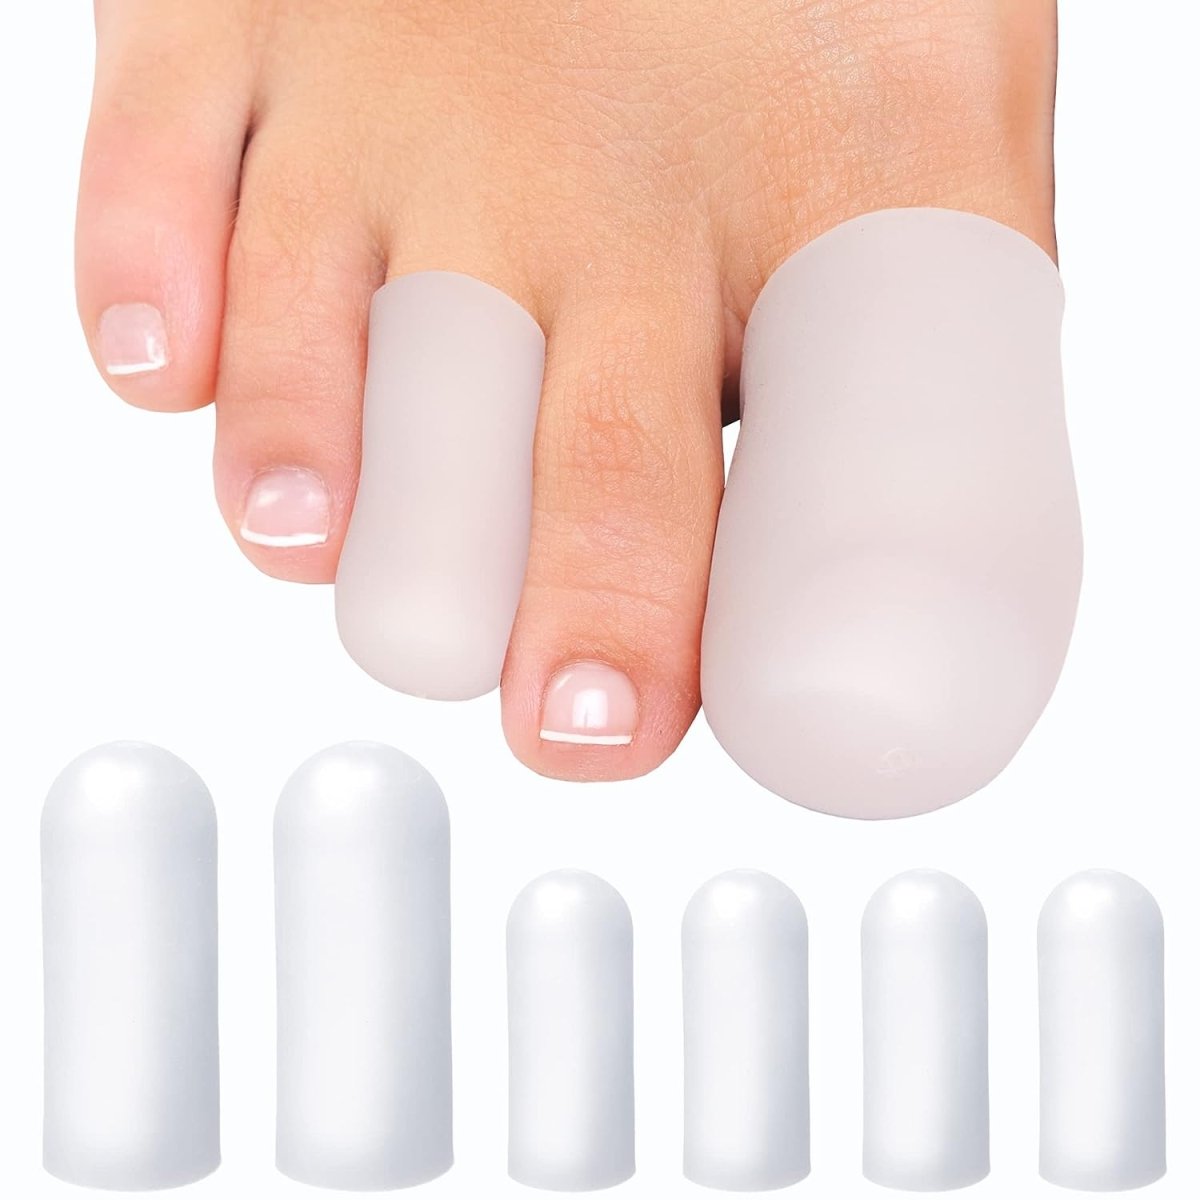 6pcs Silicone Gel Toe Cap Provide Relief from Missing/Ingrown Toenails, Corns, Calluses, Blisters, Hammer Toes Foot Supports- Royalkart - The Urban Store